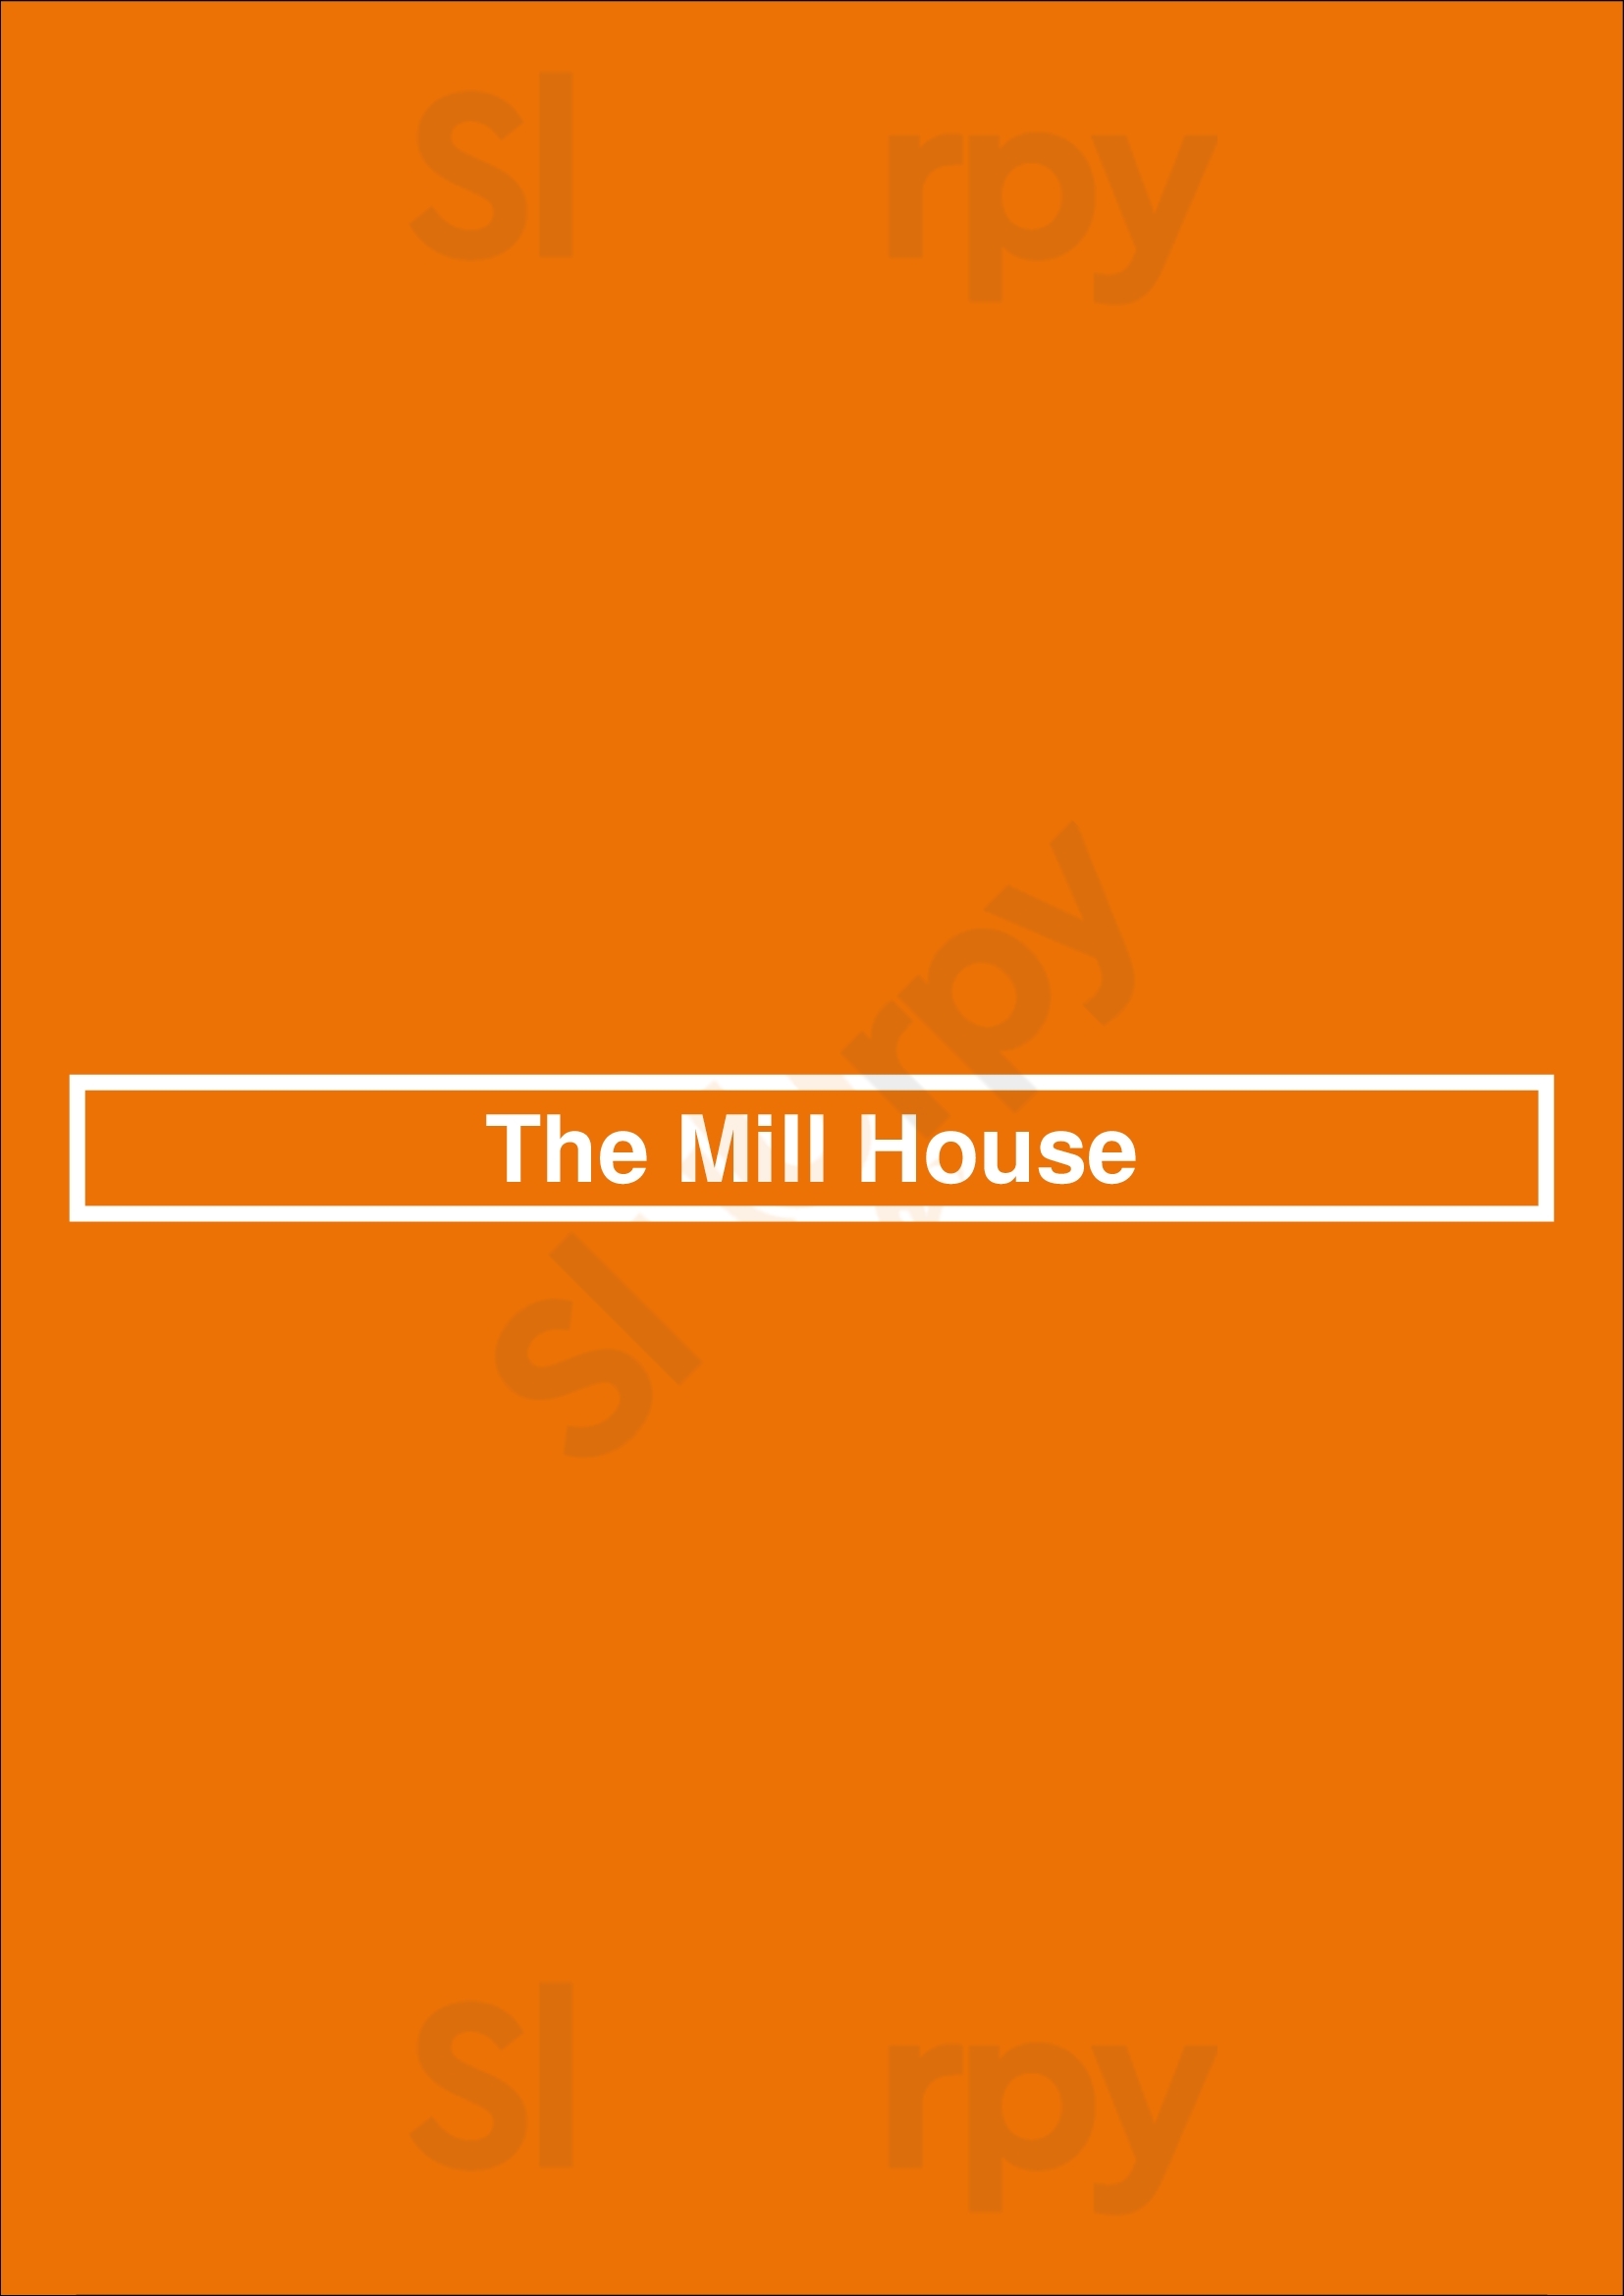 The Mill House Melbourne Menu - 1